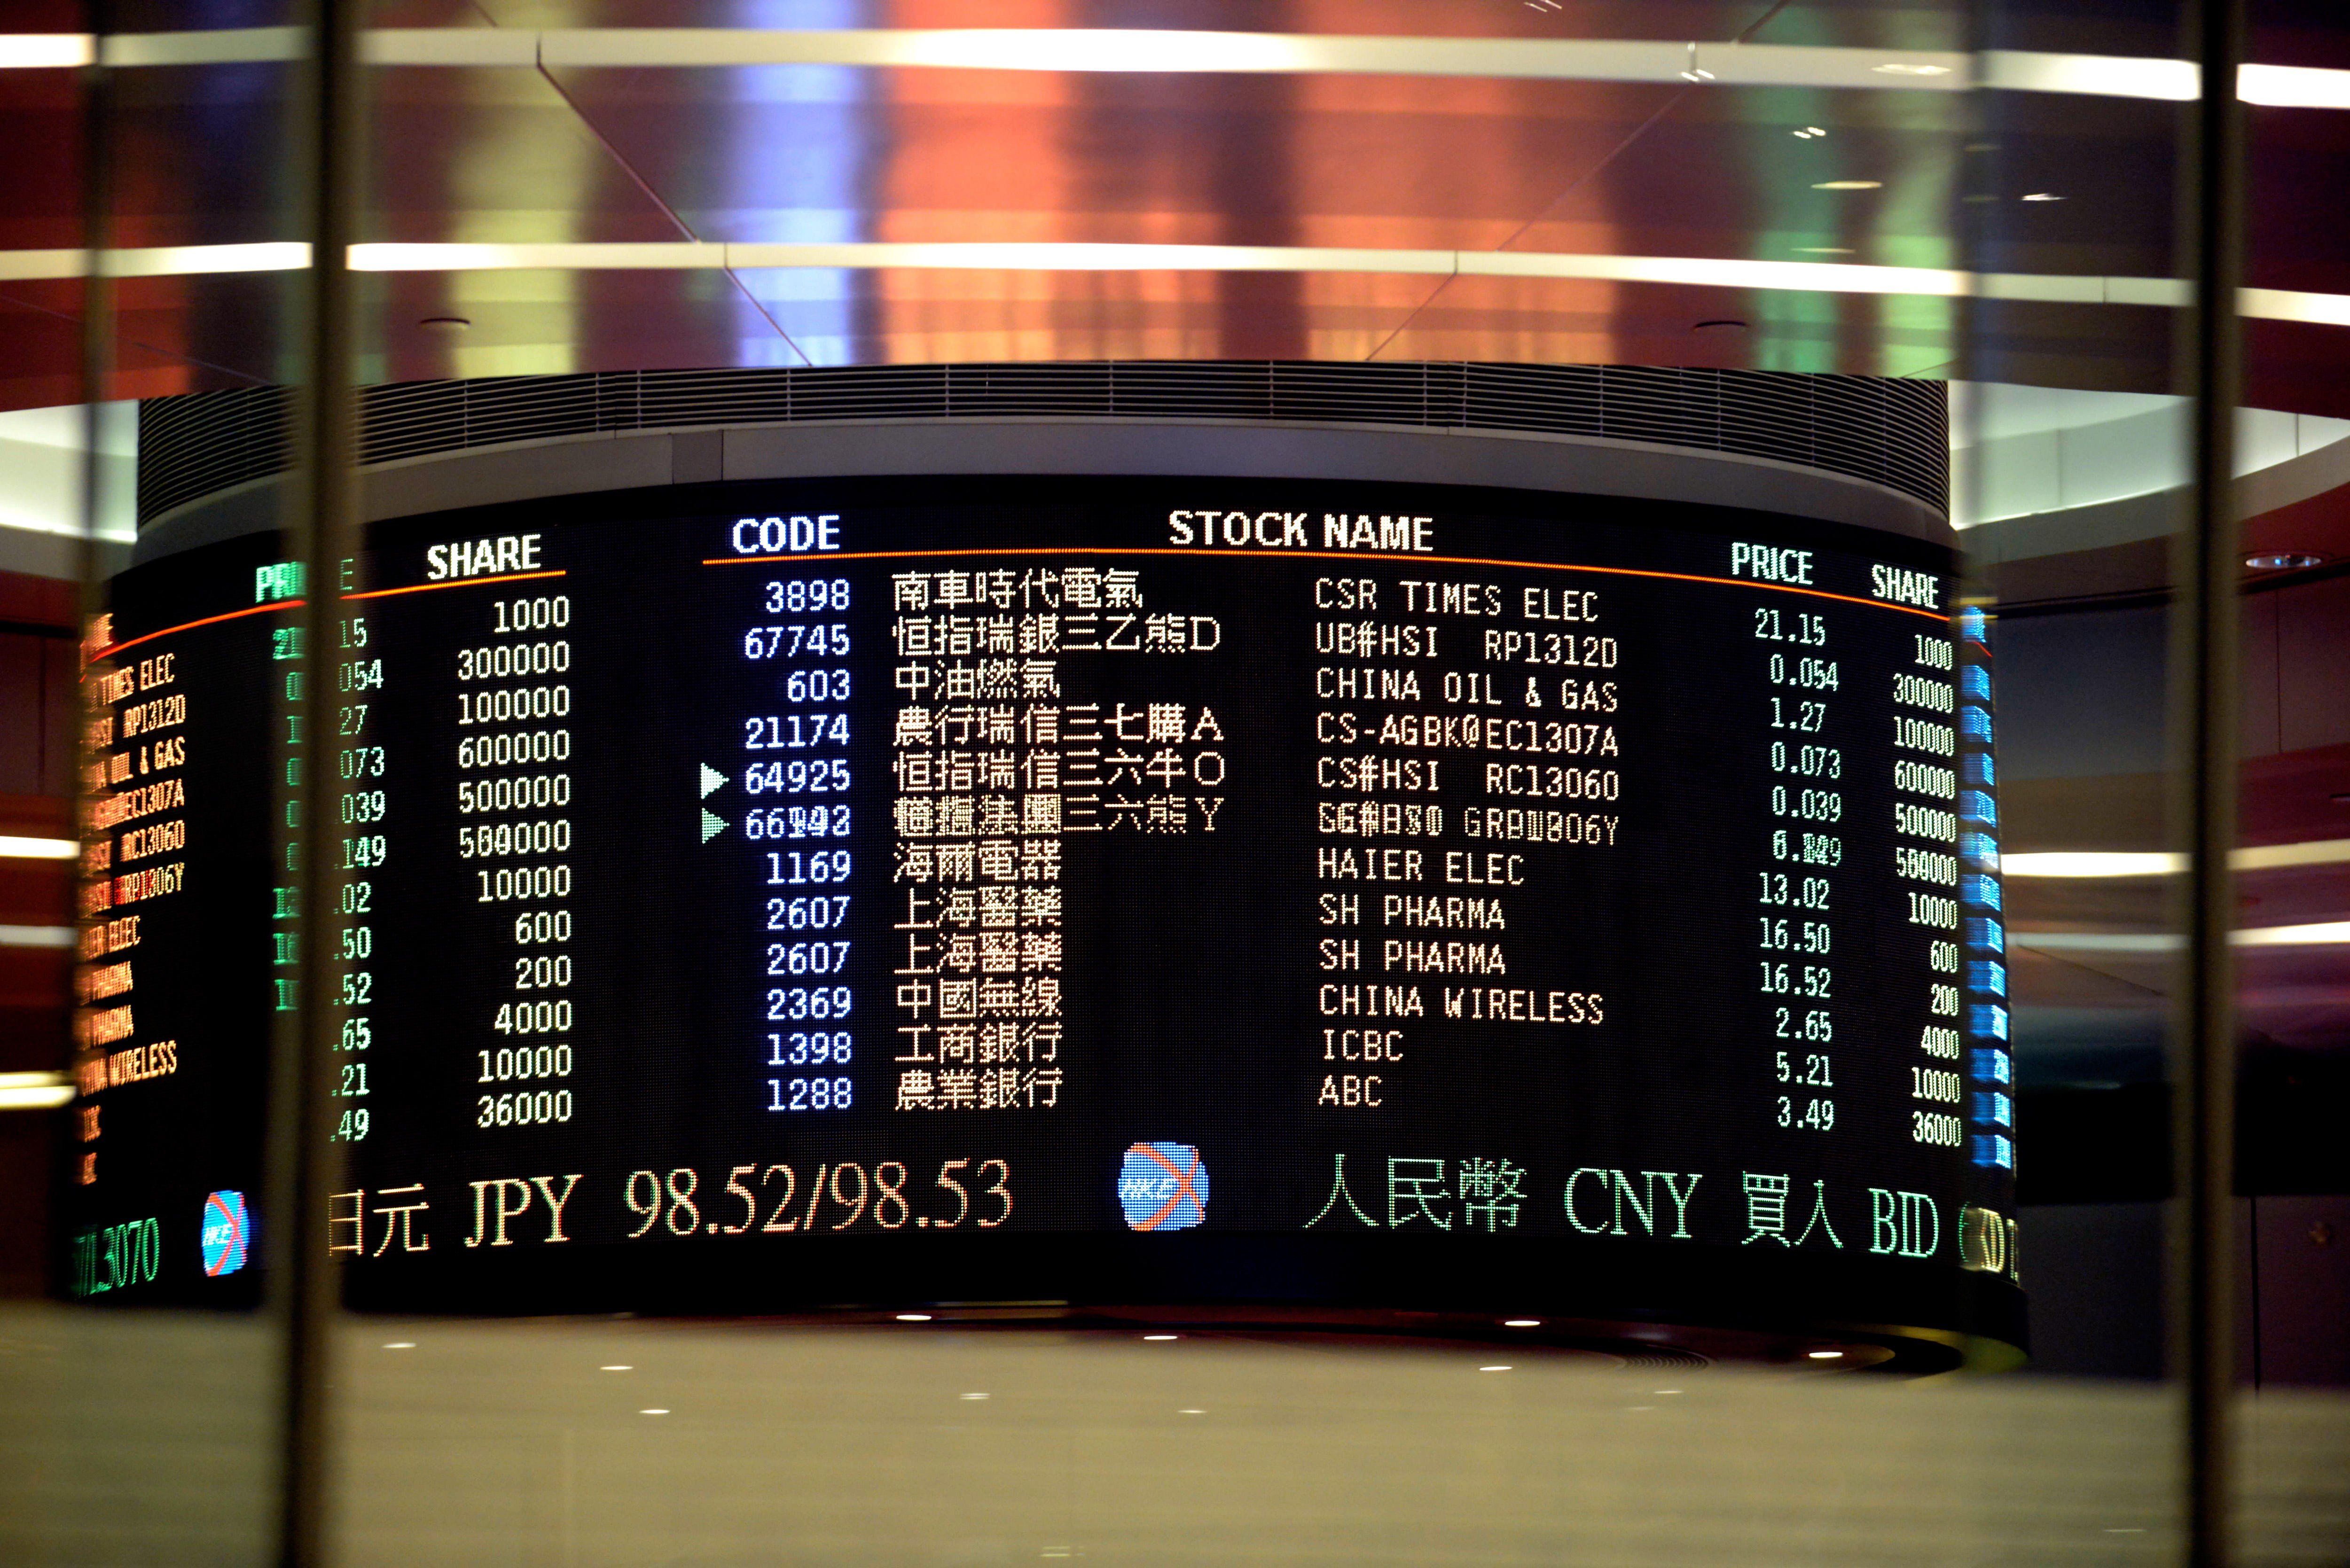 Buy-back activity picked up on Hong Kong stock exchange last week with repurchases worth HK$945 million. Photo: SCMP